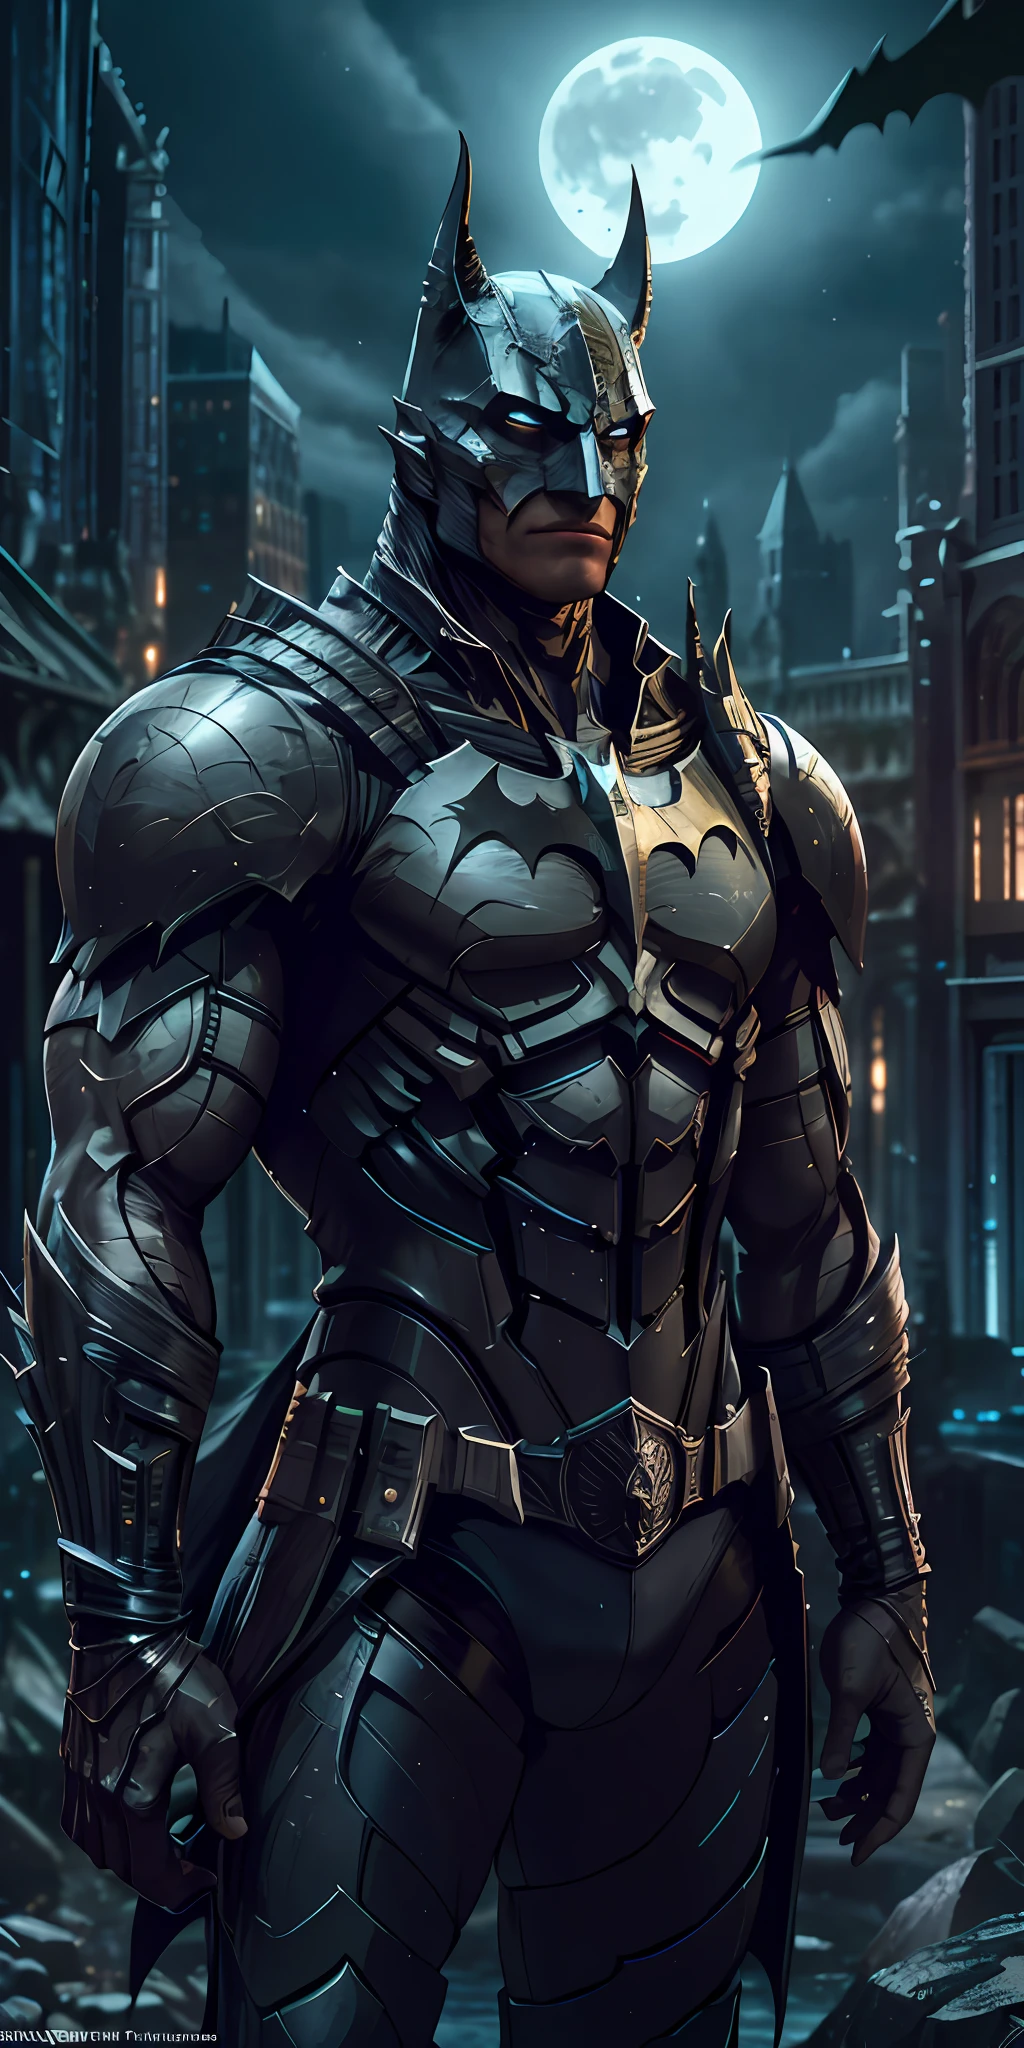 Batman from the dark knight stands imposing in a gothic lost city. Moonlight highlights your muscles and scars. The scenery is lush and mysterious, with futuristic tech and surroundings. The camera details everything, a warrior woman, in front of him.